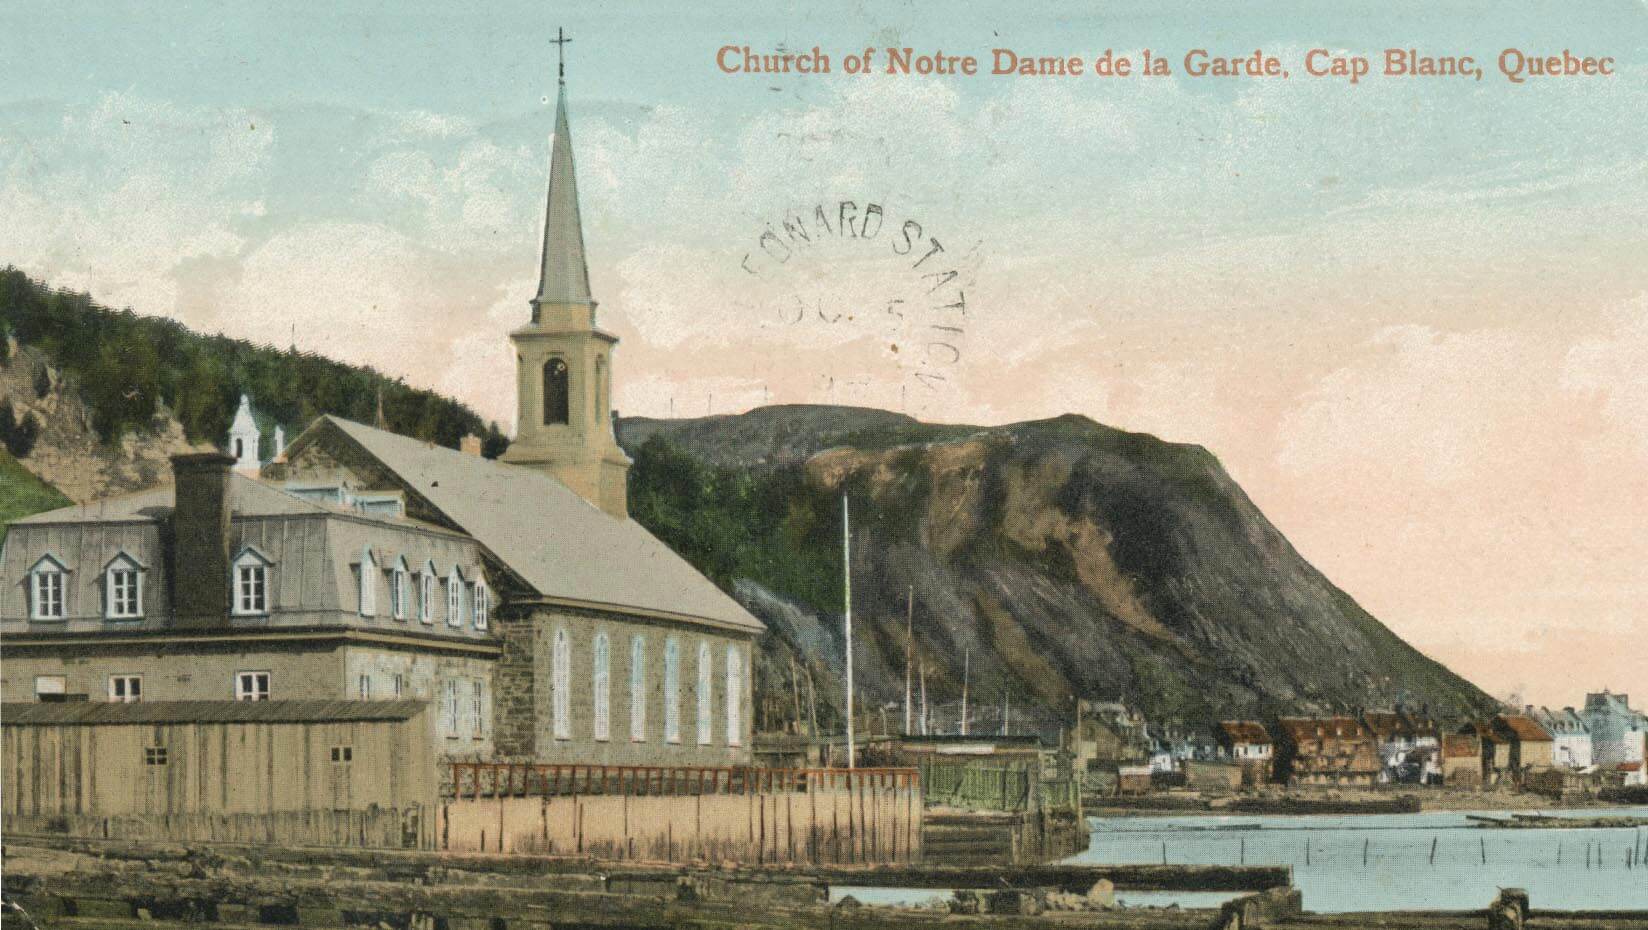 Postcard showing a church in Quebec